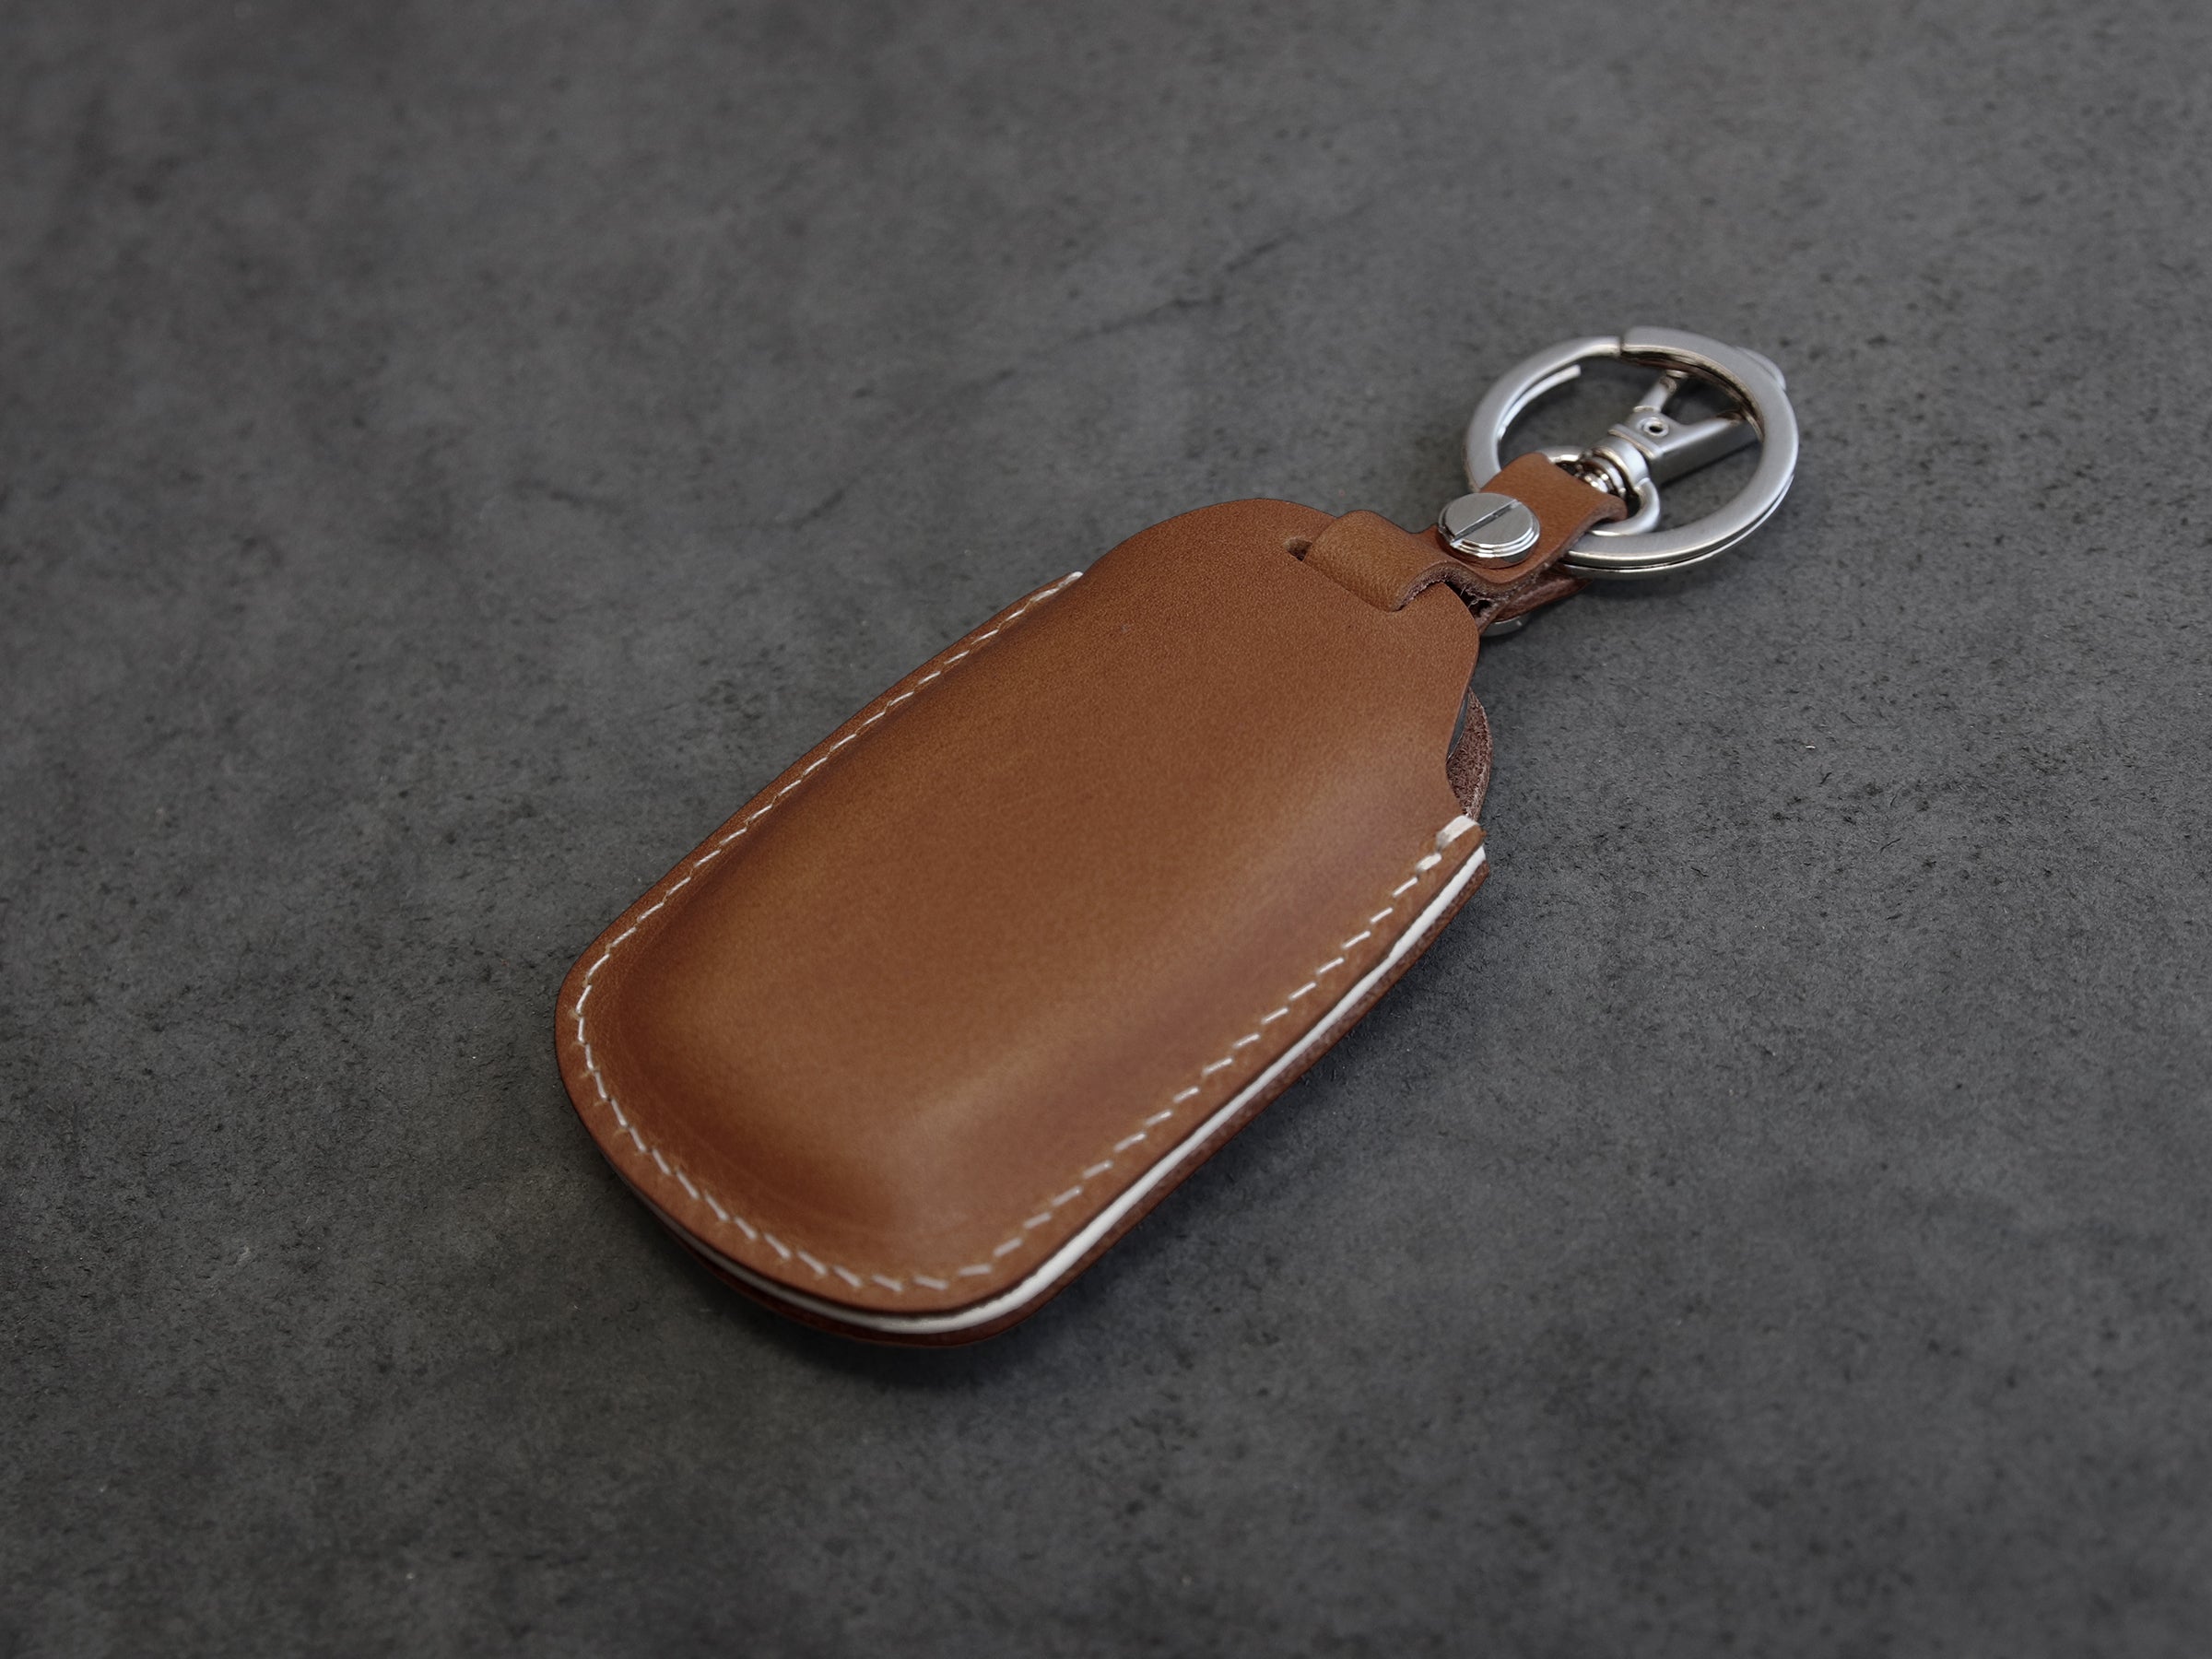 Hyundai [1-5] Key fob Cover - Palisade - Italian Veg-Tanned Leather - 5 buttons